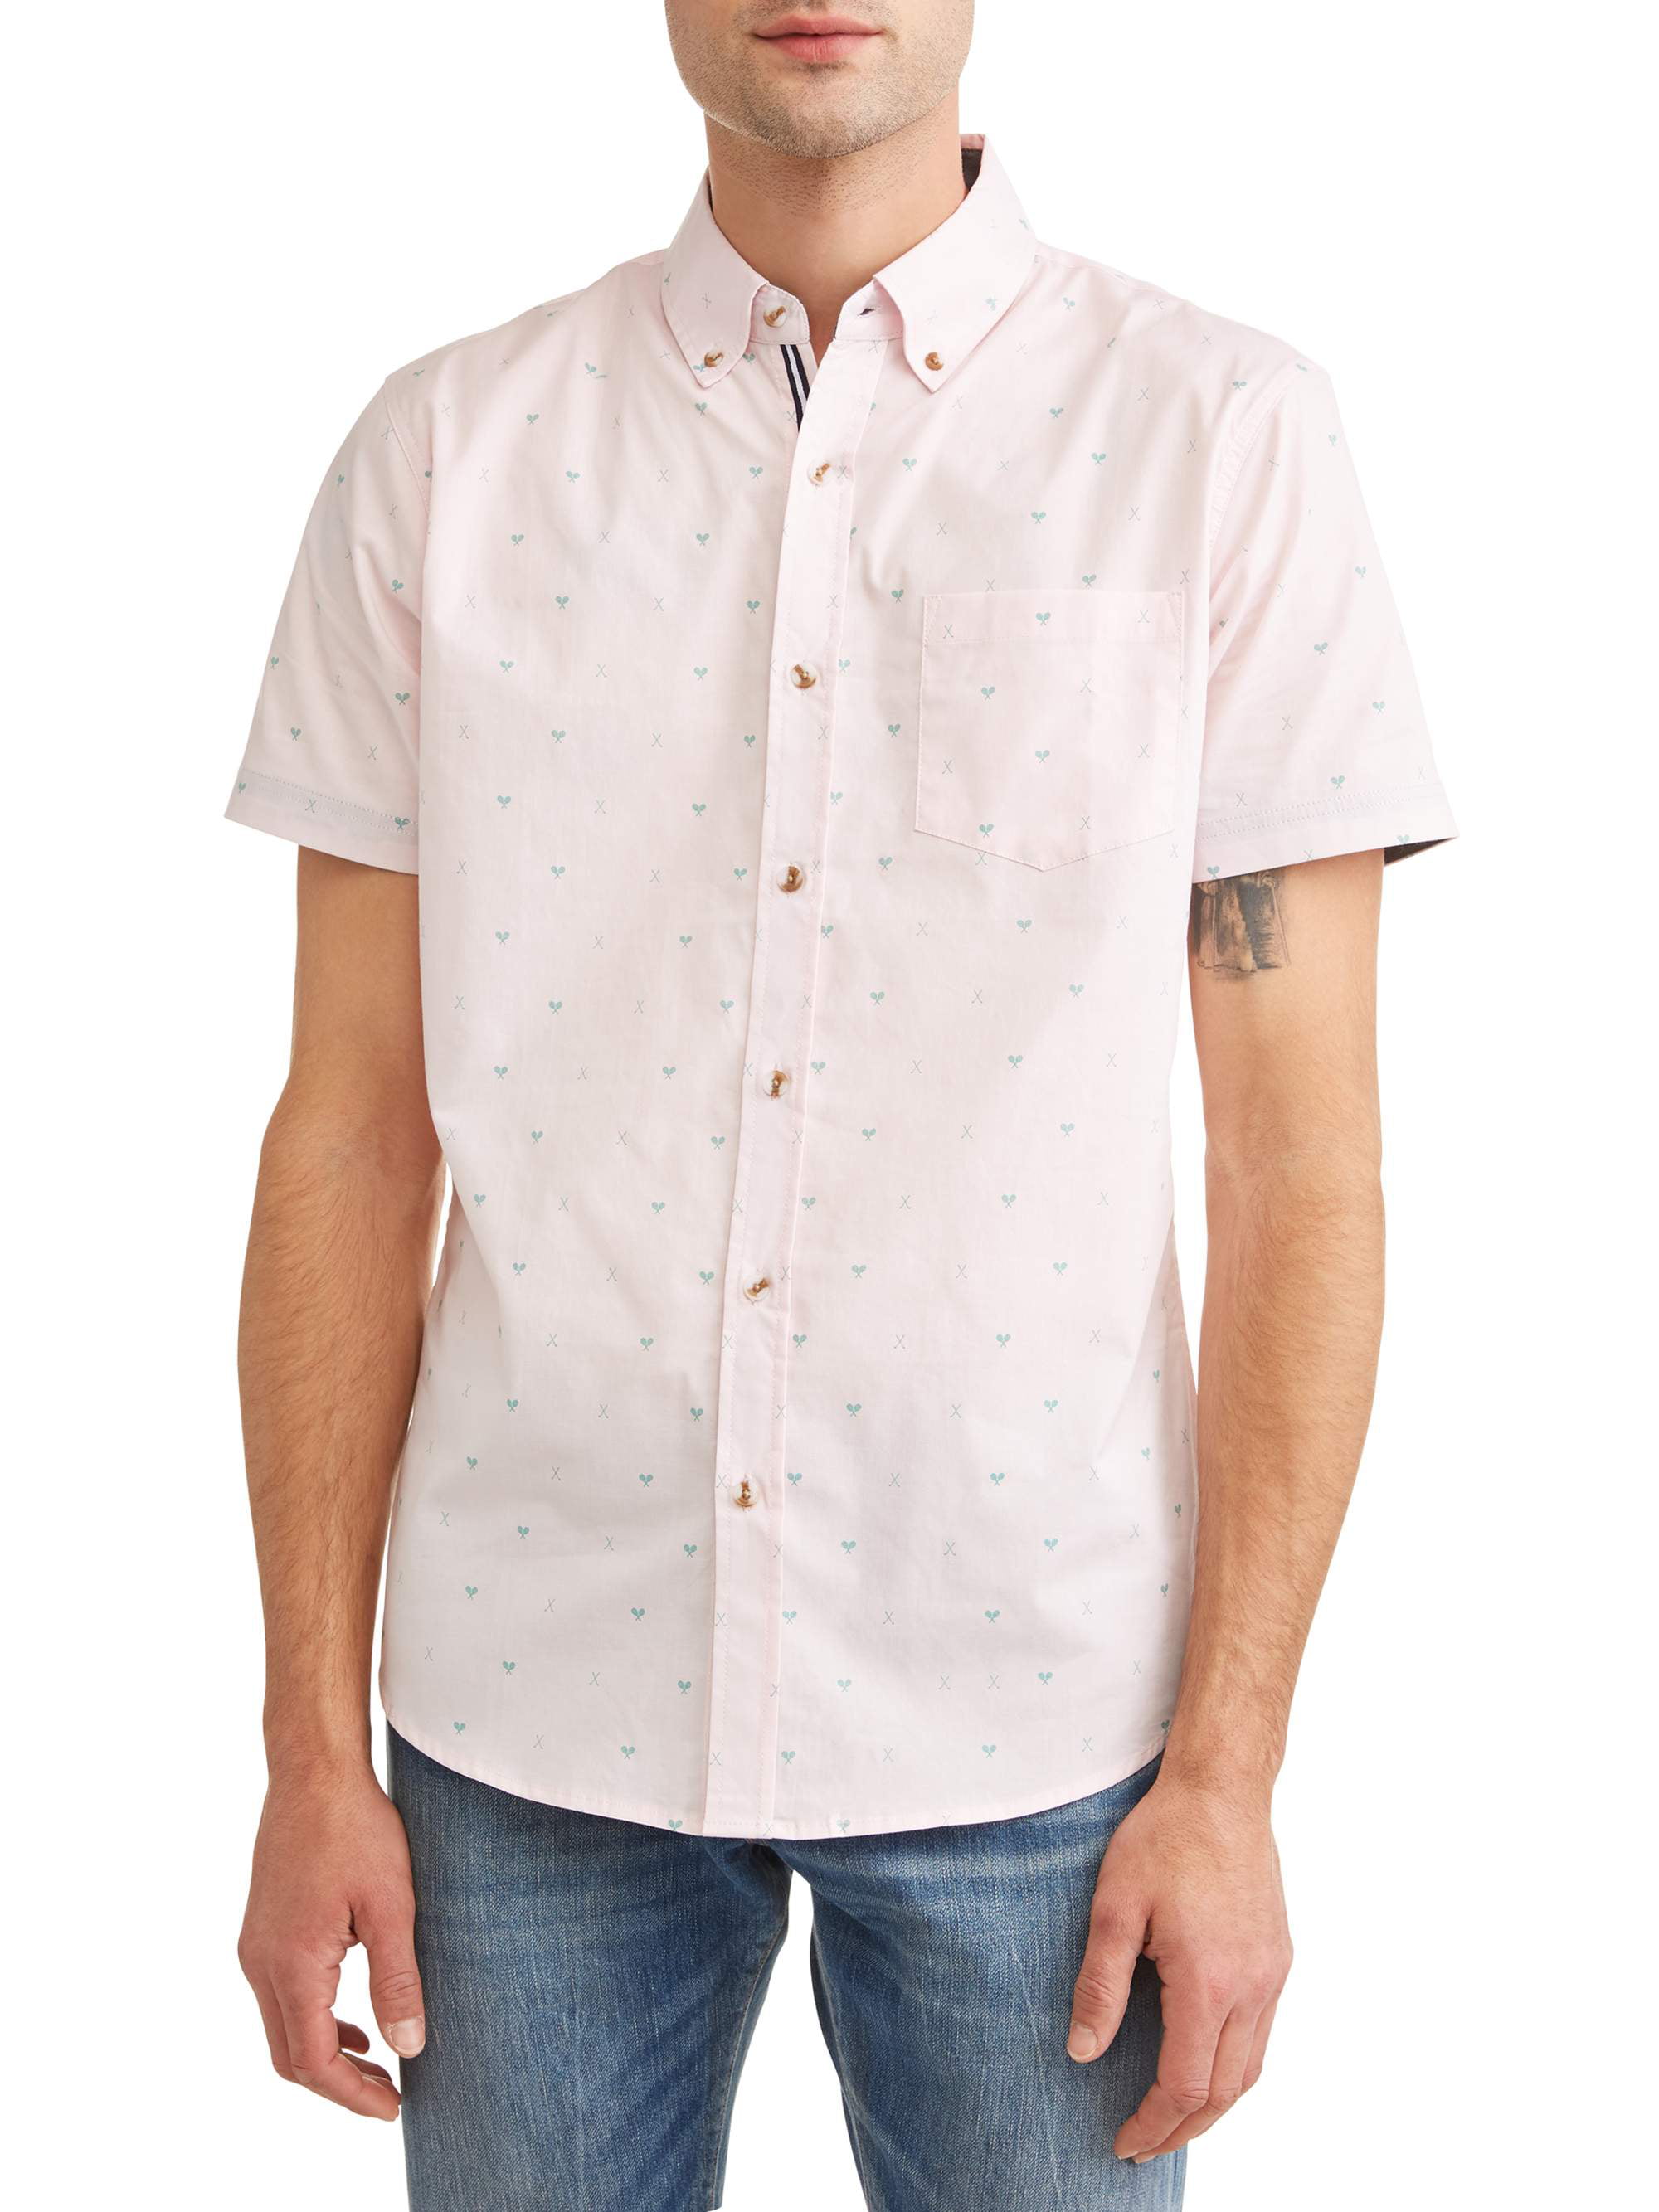 Lee - Lee Men's Short Sleeve Stretch Button Down Shirt, Available up to ...